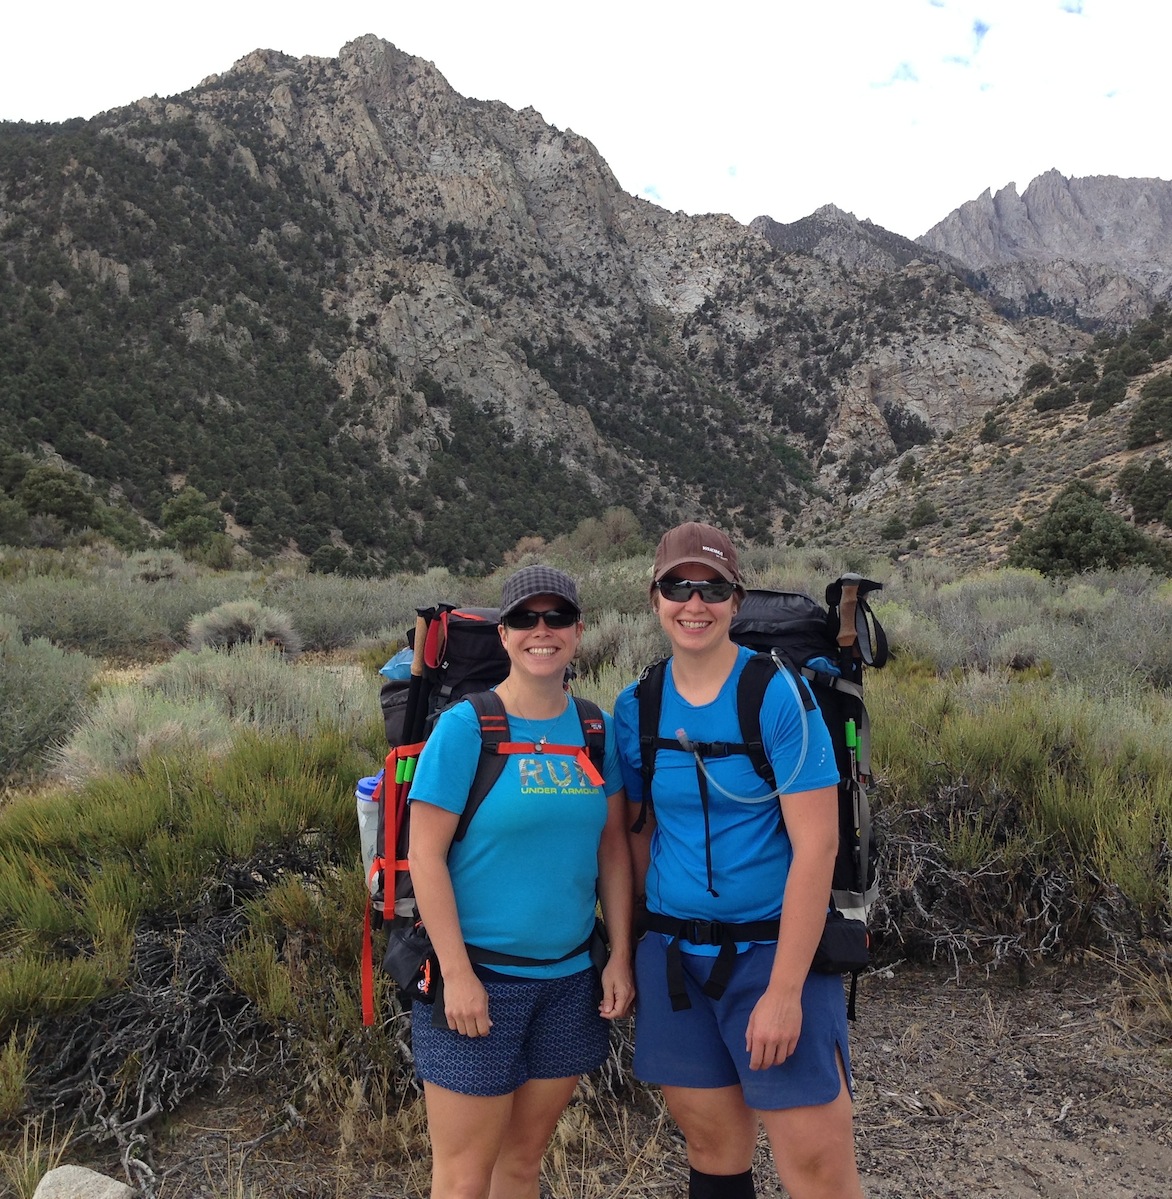 Elissa and Kate are ready to head over Shepherd Pass to go NOBO on the JMT to Yosemite. Come back and visit the Base Camp!